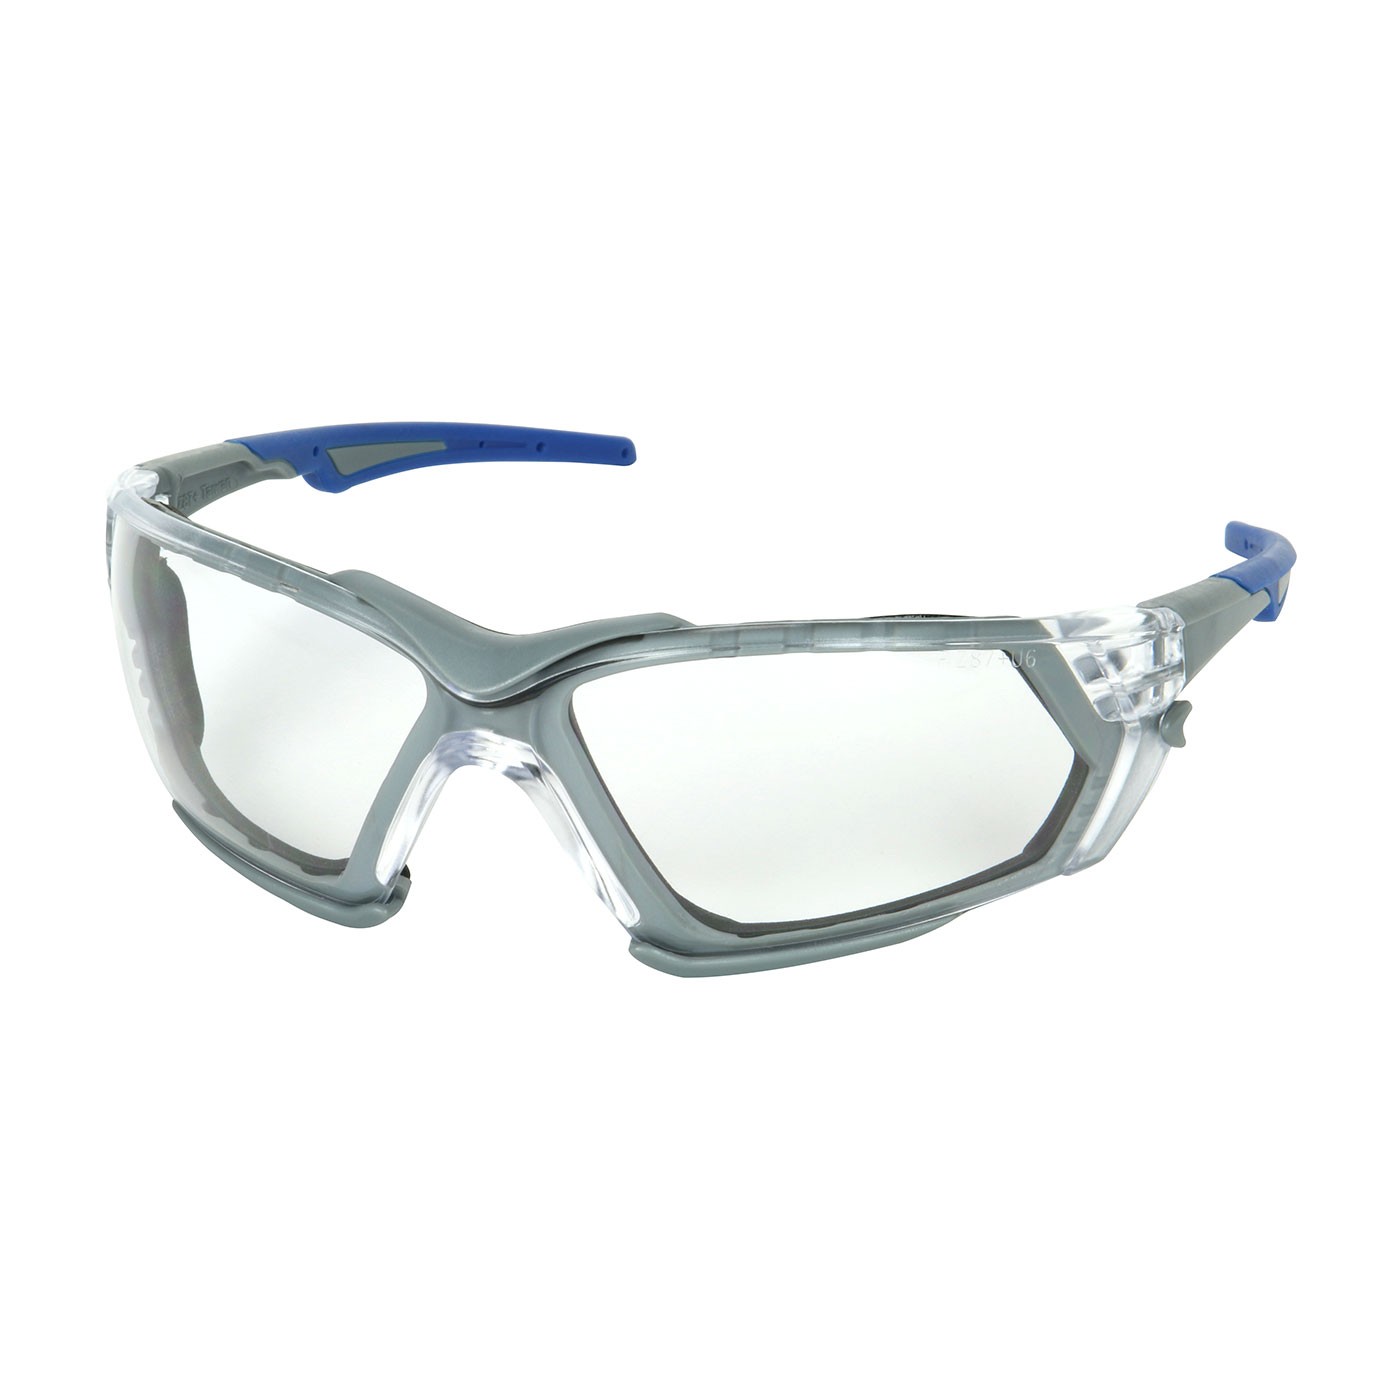 Fortify™ Rimless Safety Glasses with Gray Frame, Clear Lens, Foam Padding and Anti-Scratch / Anti-Fog Coating  (#250-54-0020)